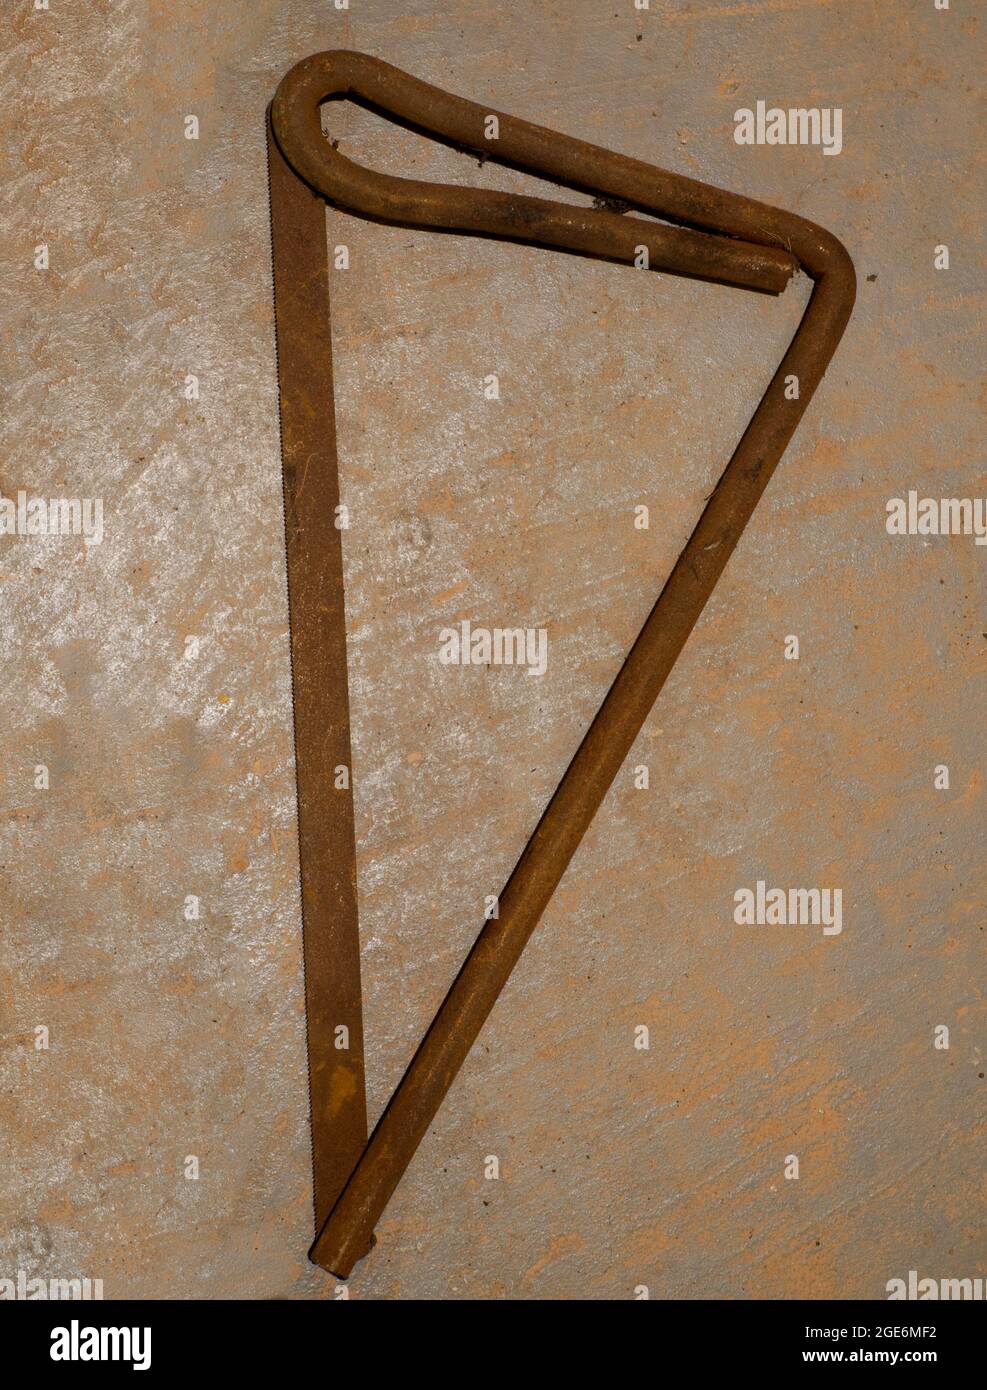 An All Metal Antique Hacksaw Stock Photo